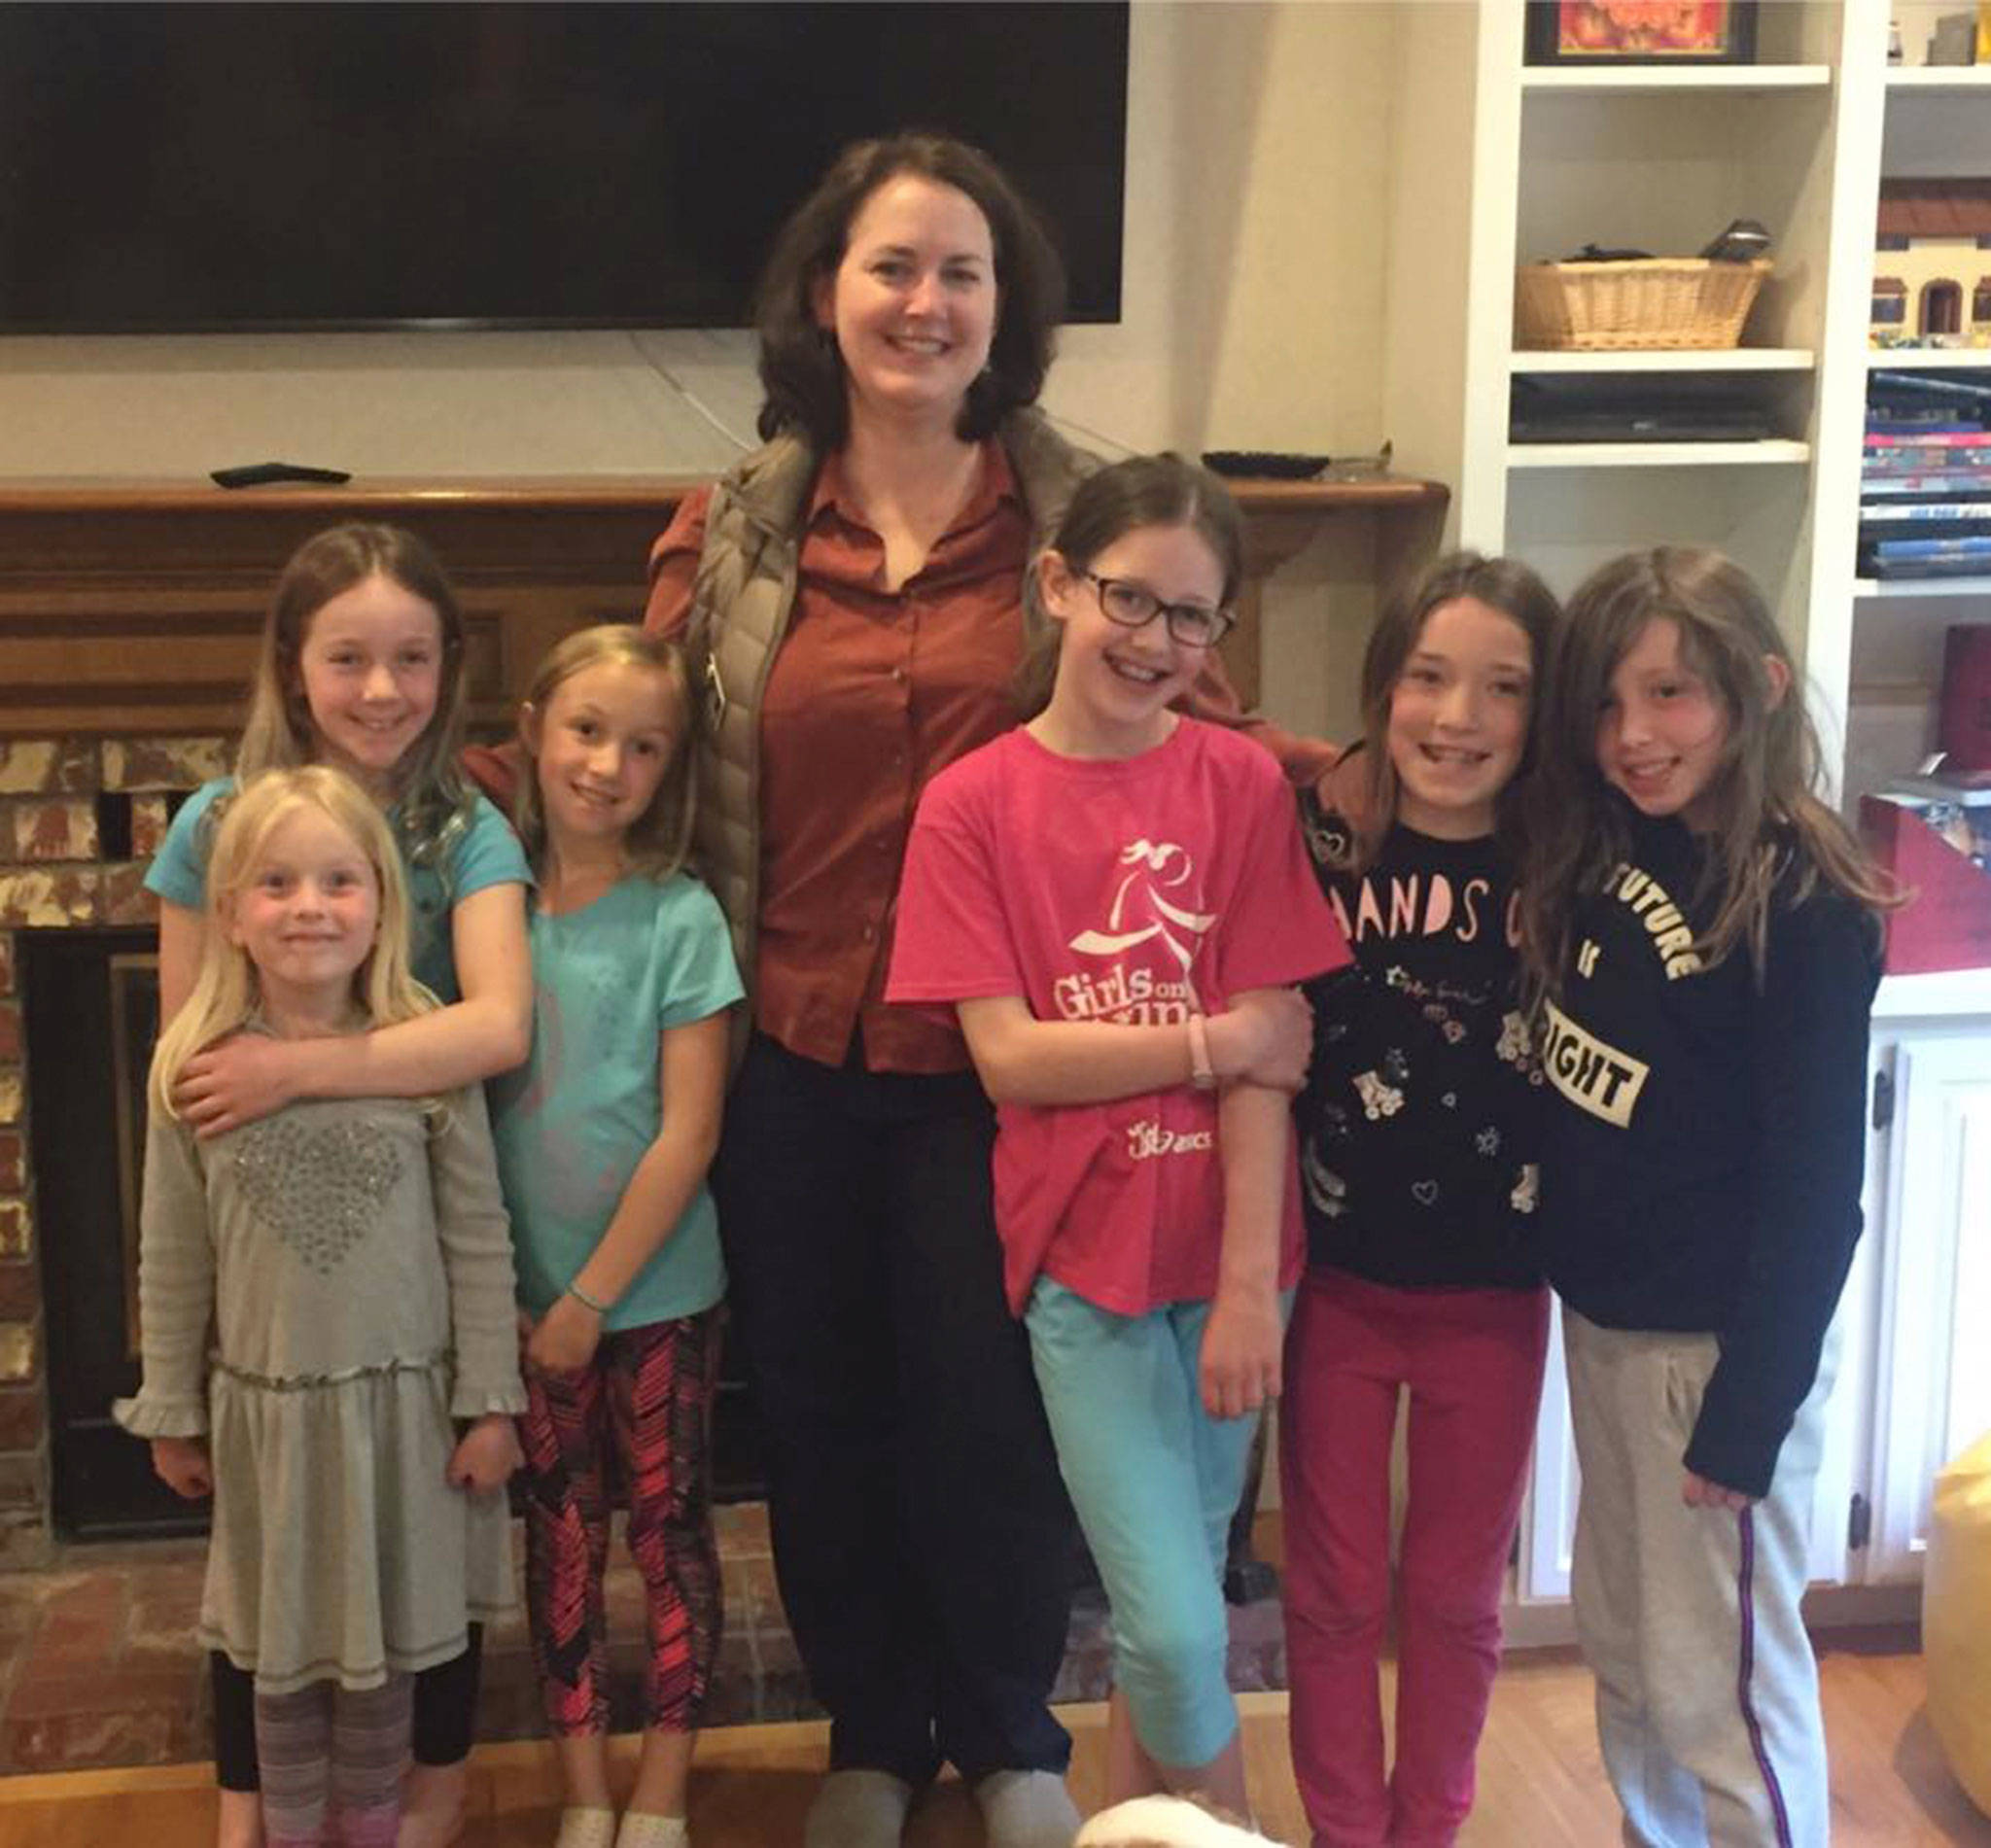 The girls meet with Rep. Shelley Kloba. Photo courtesy of Angela Pifer